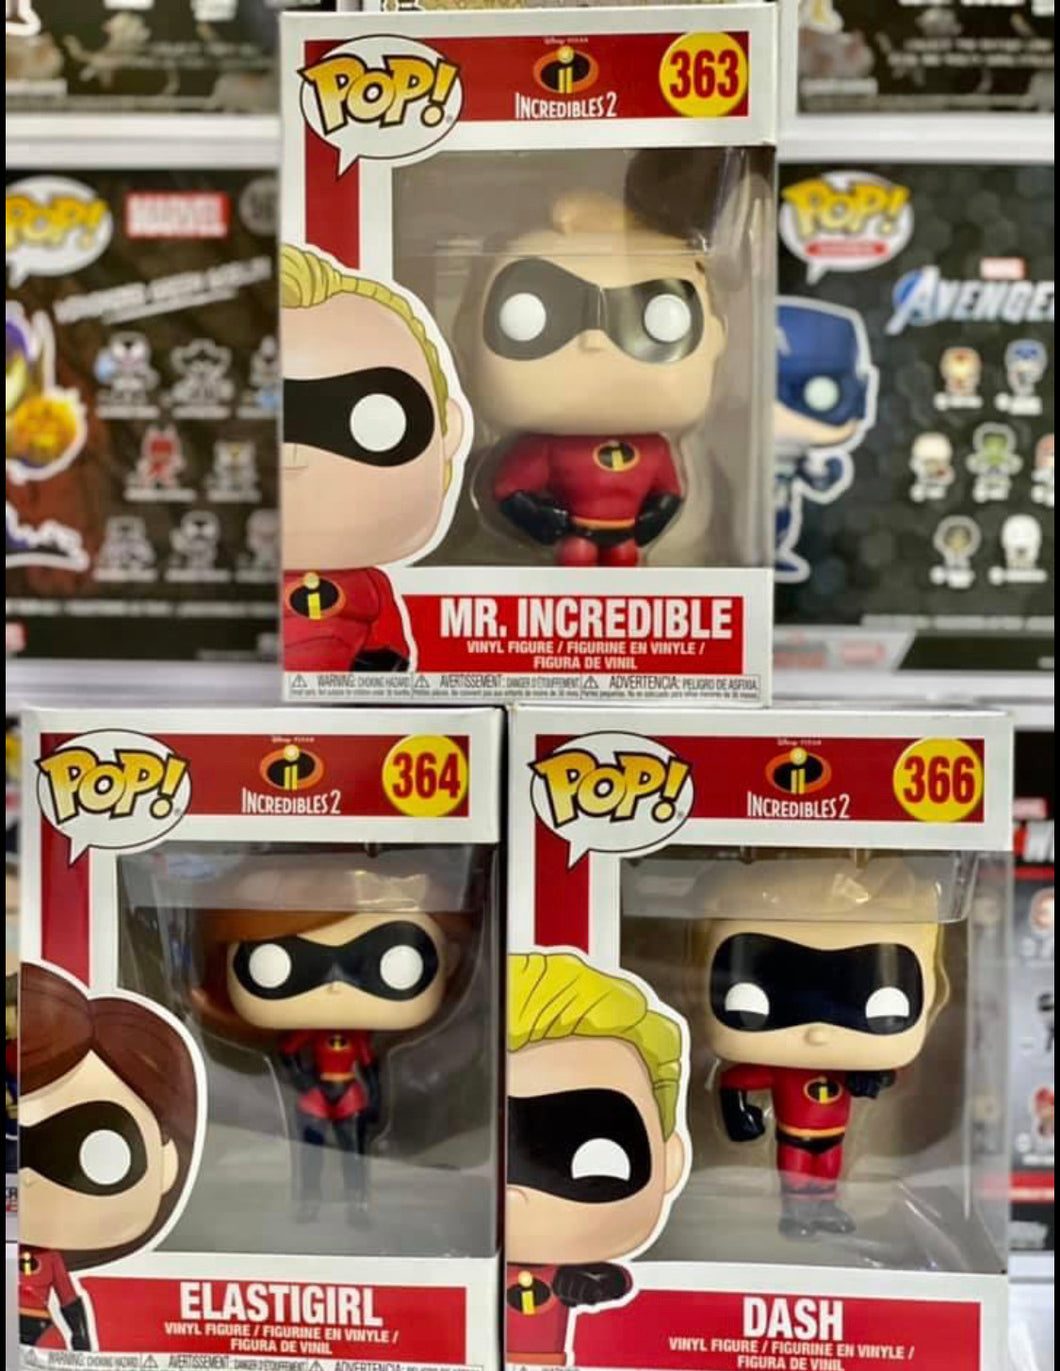 x 3 Incredibles Funko POPS!  (Box Damage) Auction  (Reserved for Auction Winner)